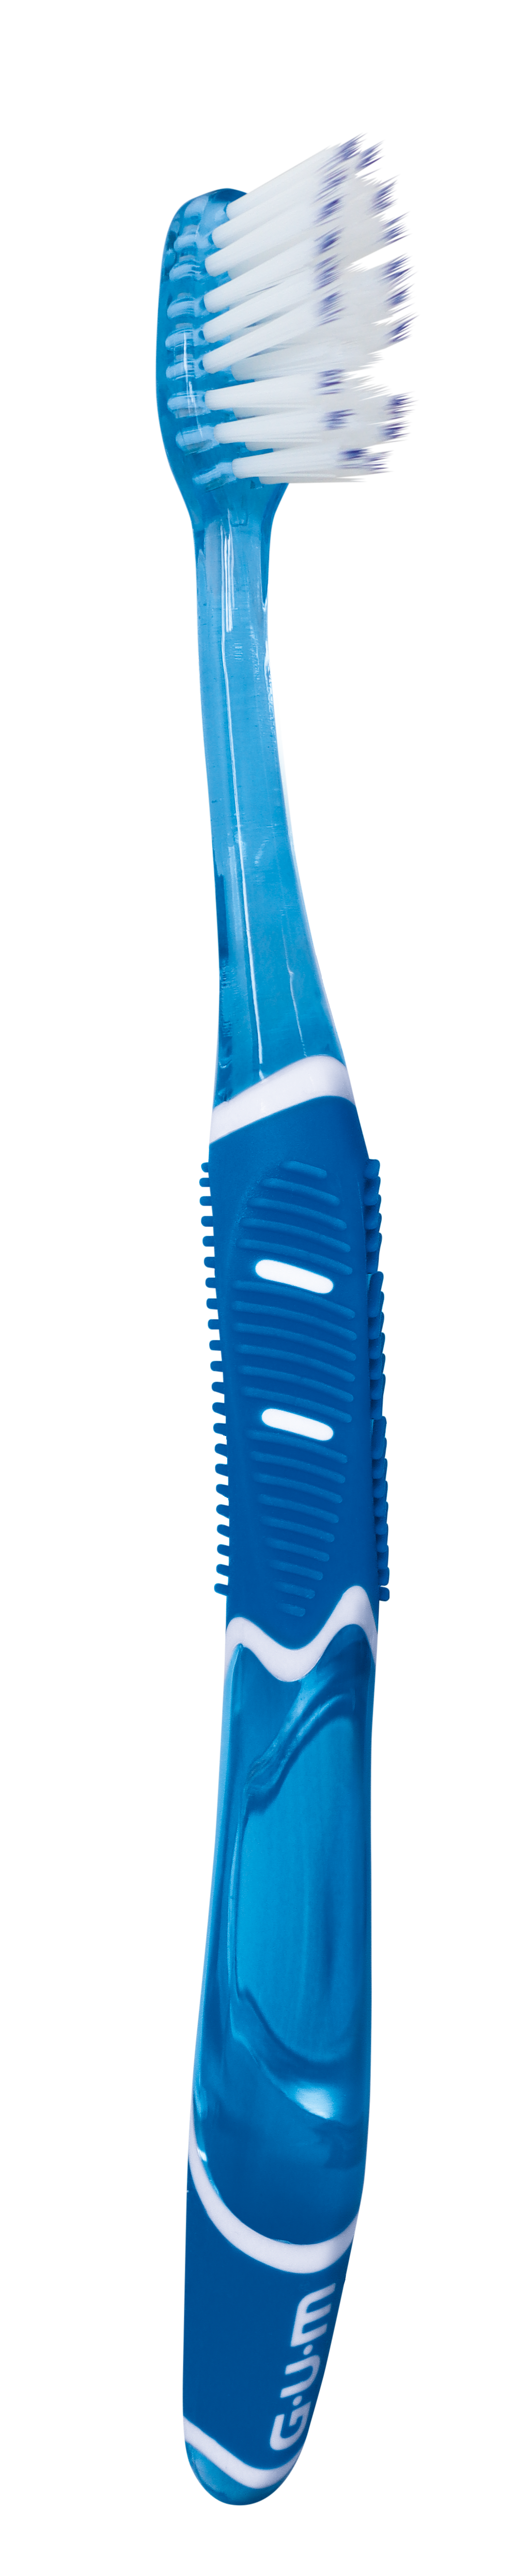 525-GUM-PRO-Toothbrush-BLUE-COMPACT-SOFT-N5